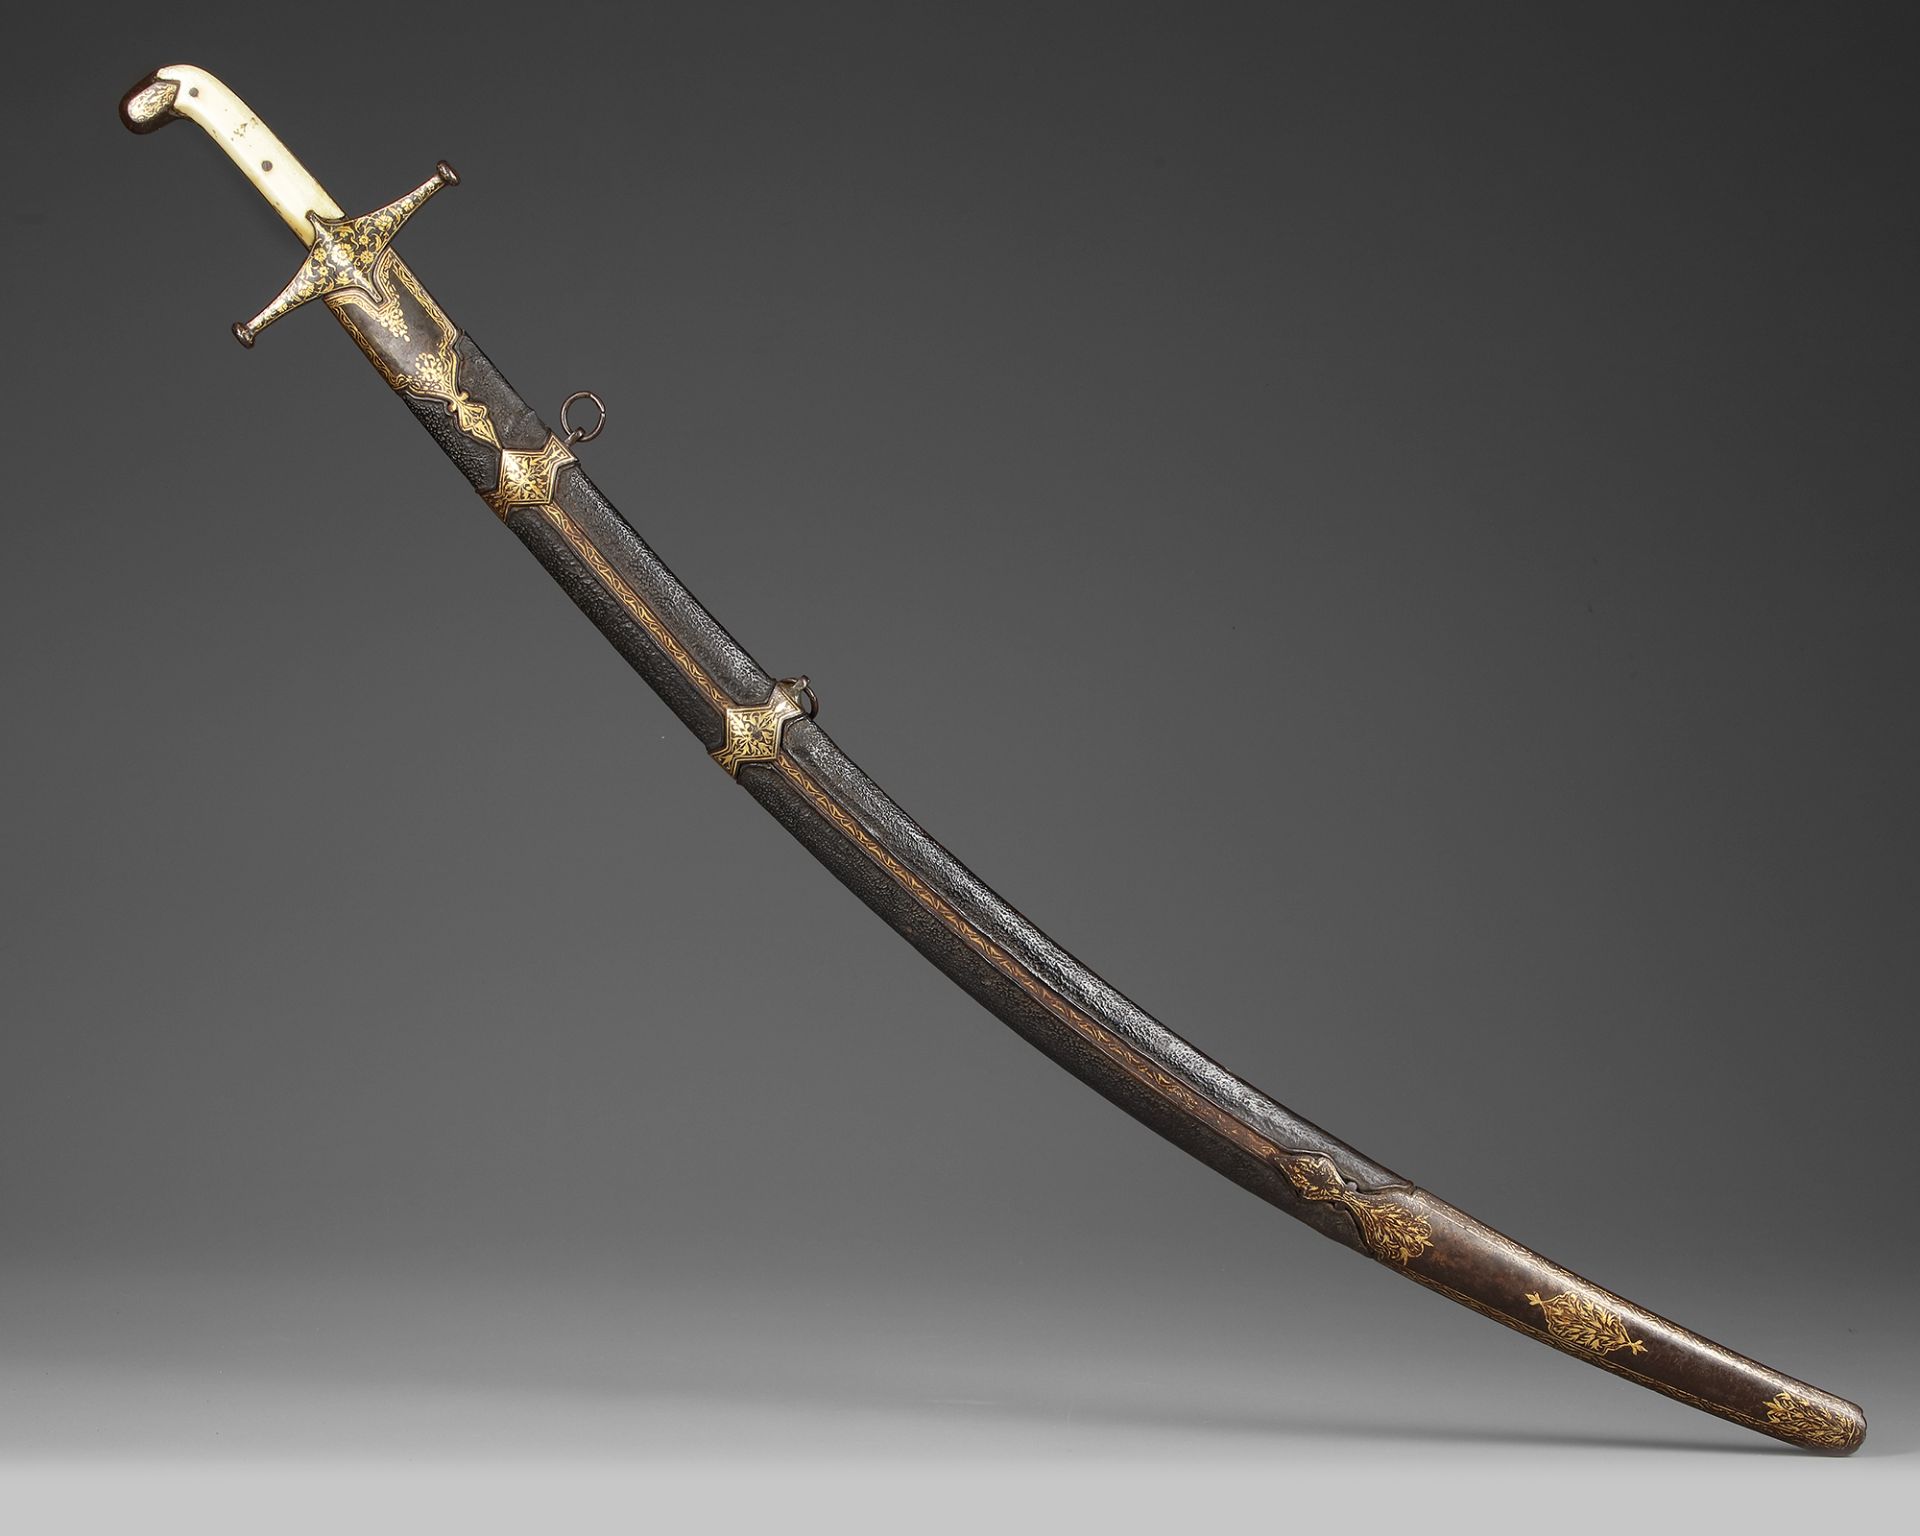 AN IVORY-HILTED WATERED-STEEL SWORD (SHAMSHIR), PERSIA DATED 1244 AH/1828 AD